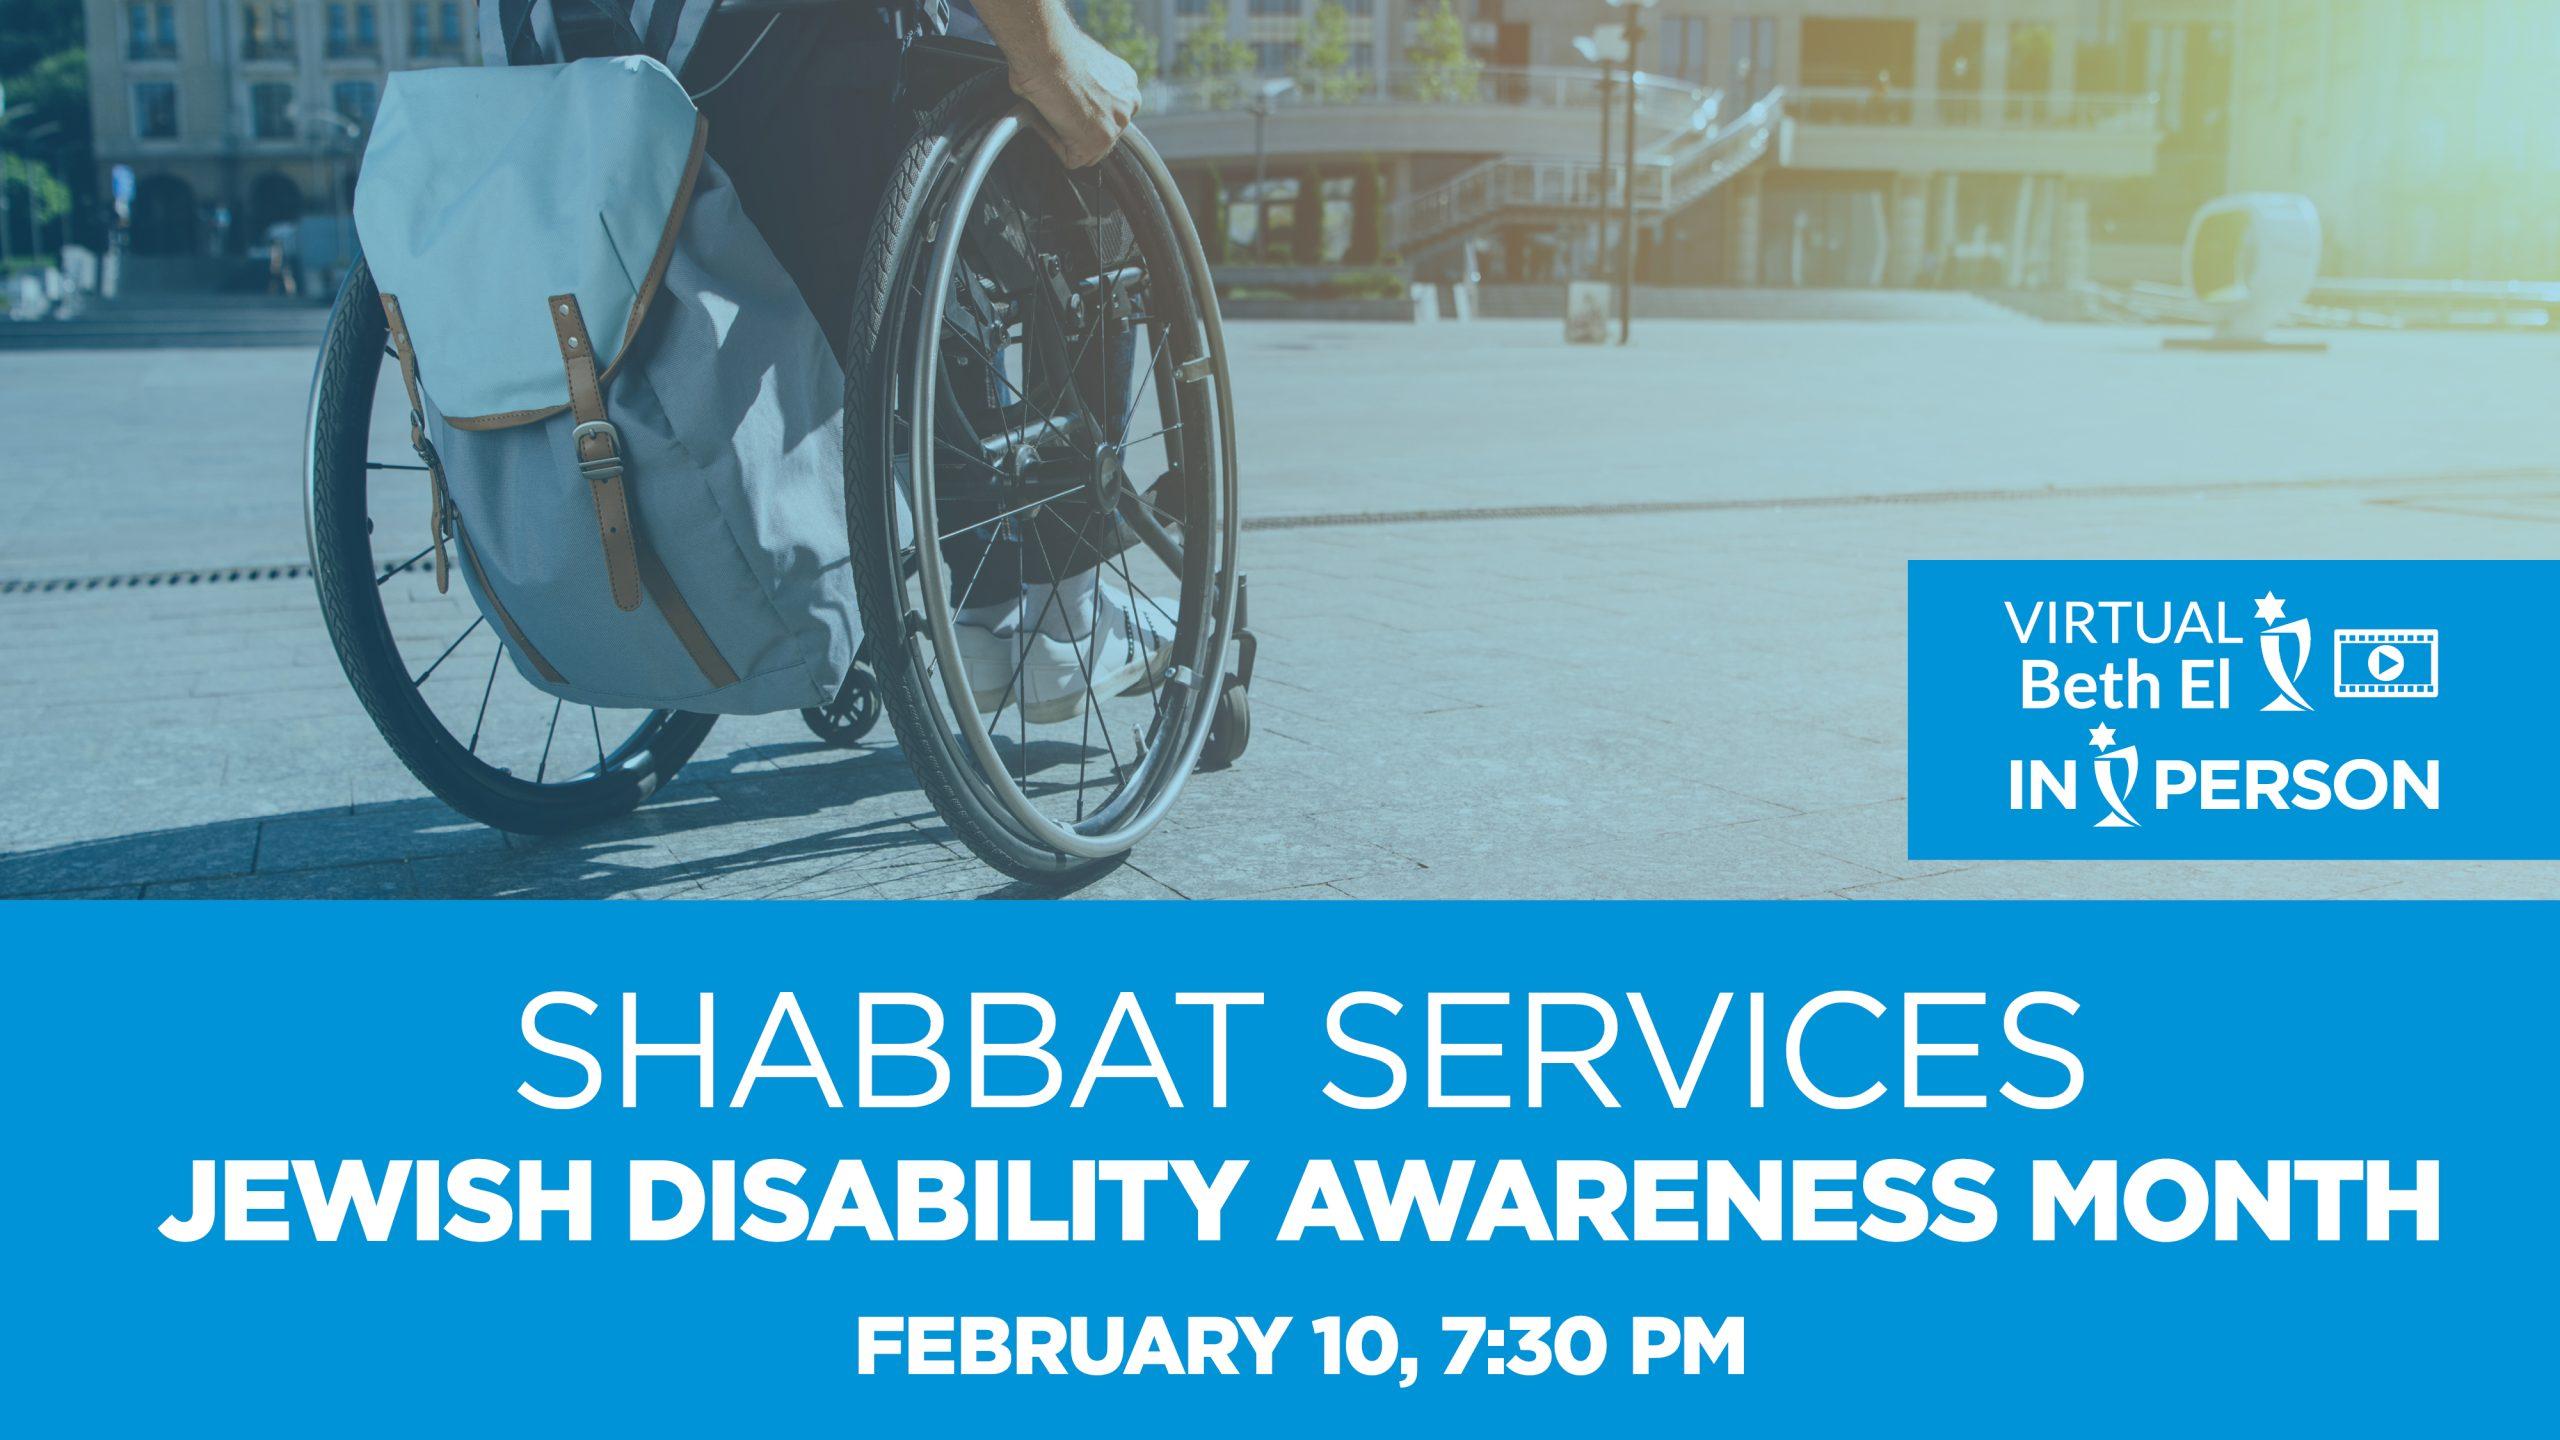 On this Shabbat, in recognition of Jewish Disability Month we welcome a representative from Ruth and Norman Rales Jewish Family Services, who will share all the ways our local Jewish social service agency supports disability needs in our community.